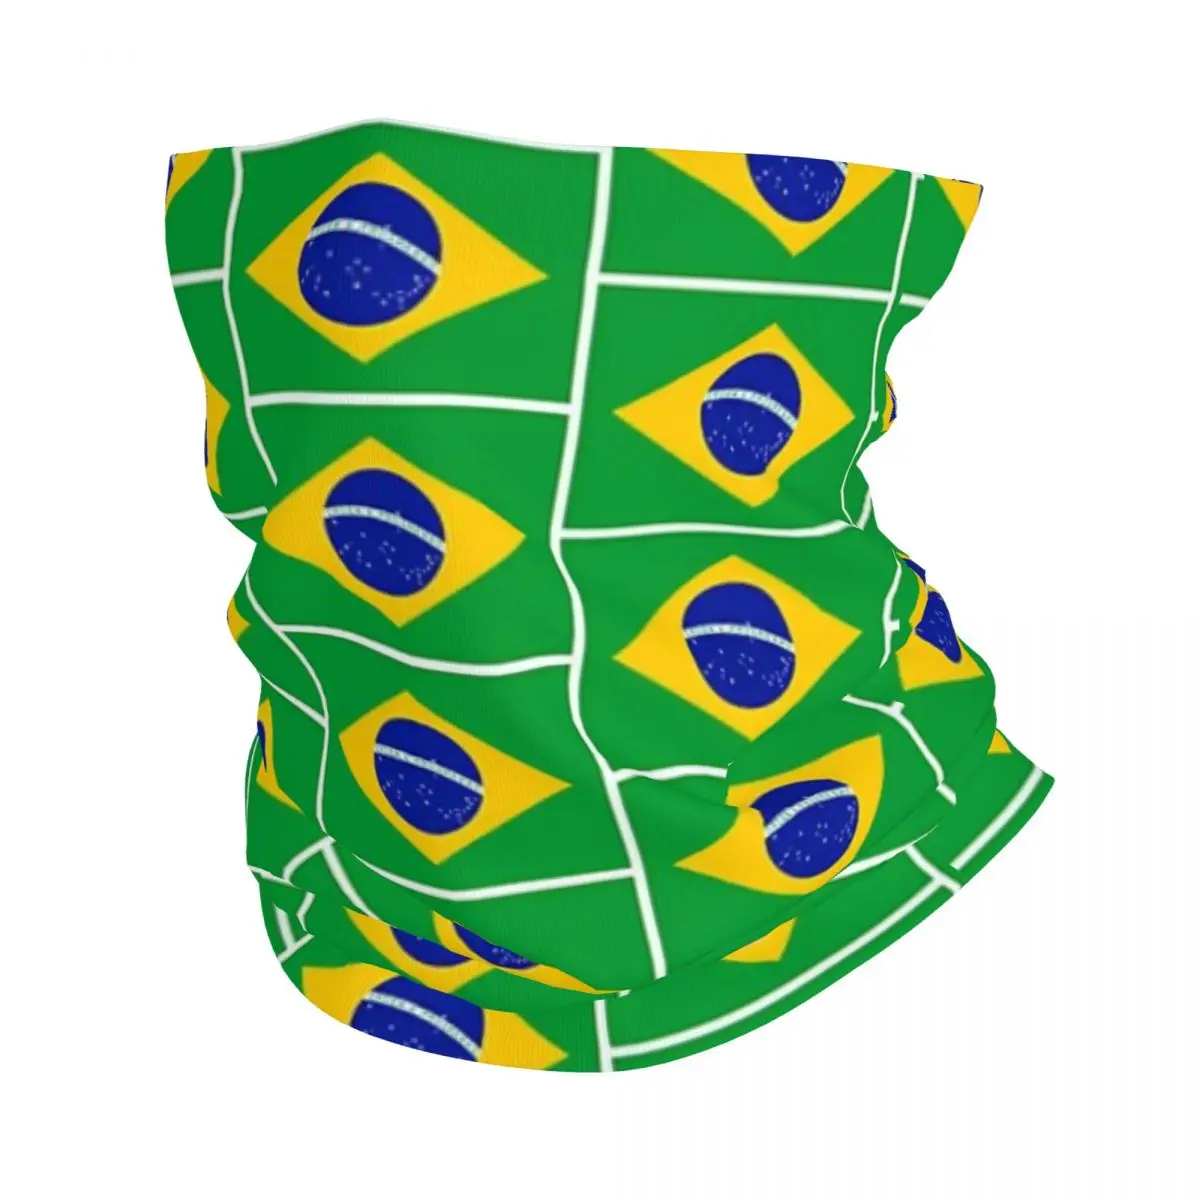 

Brazil National Flag Bandana Neck Cover Printed Mask Scarf Warm Headwear Riding For Men Women Adult Washable